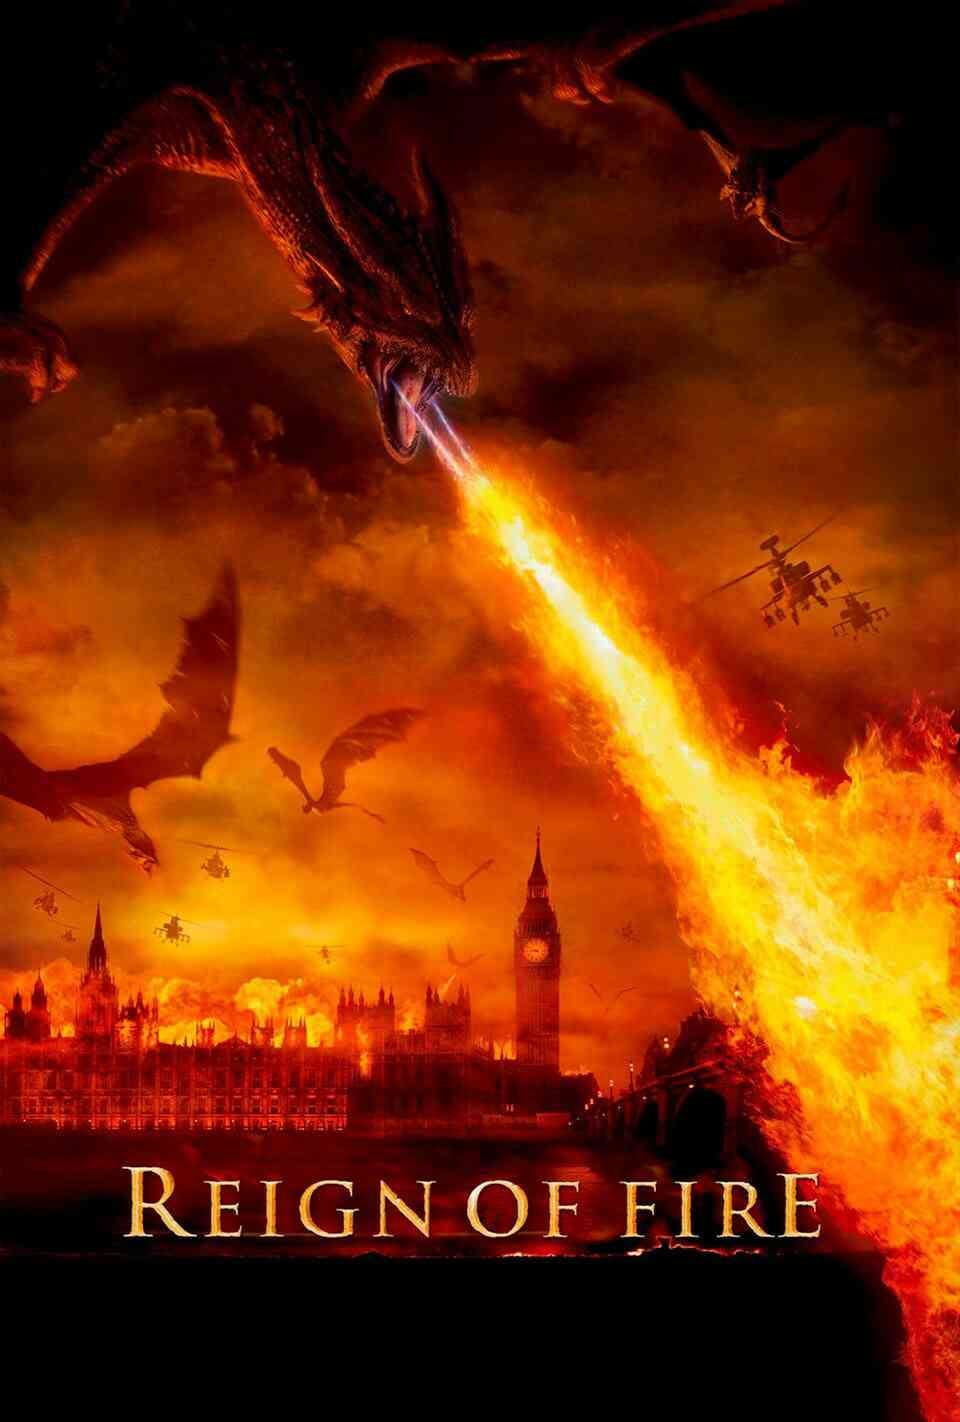 Read Reign of Fire screenplay (poster)